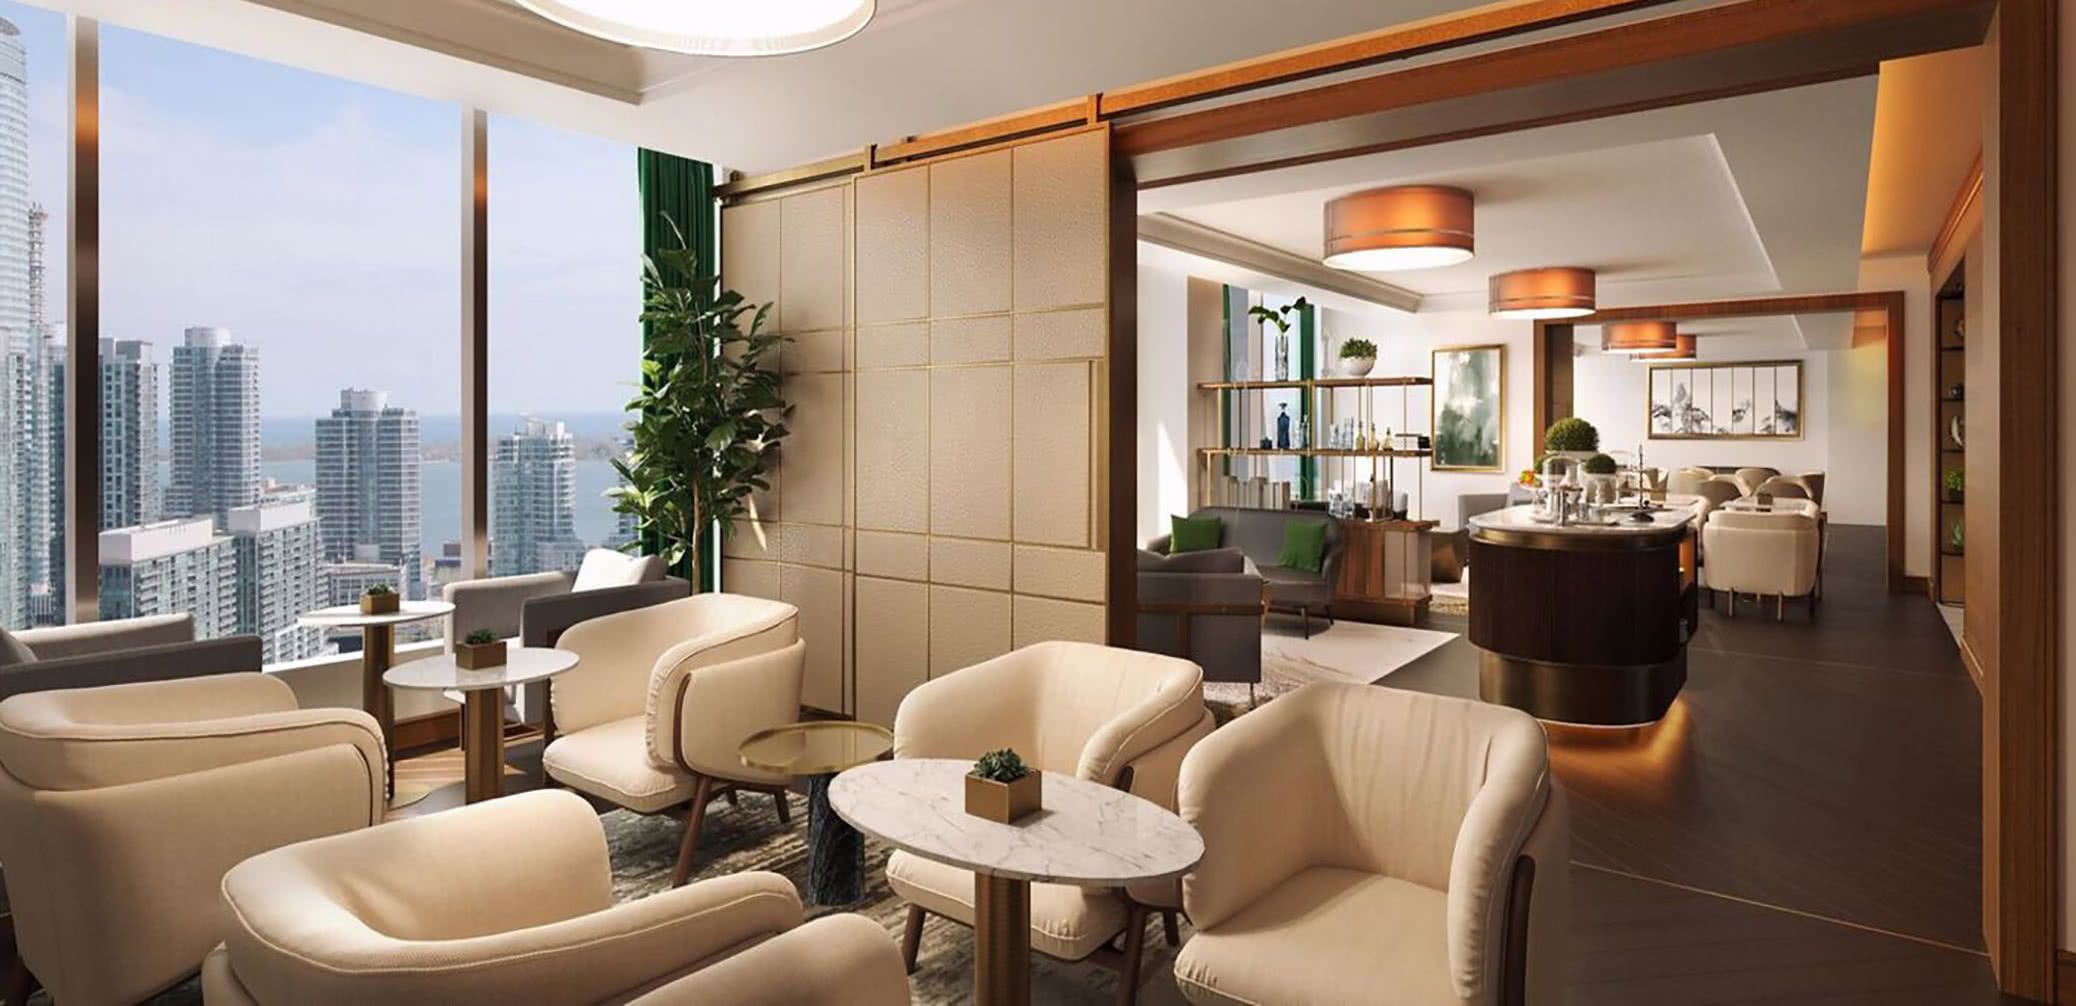 Best Executive Club Lounges At Hotels In Toronto